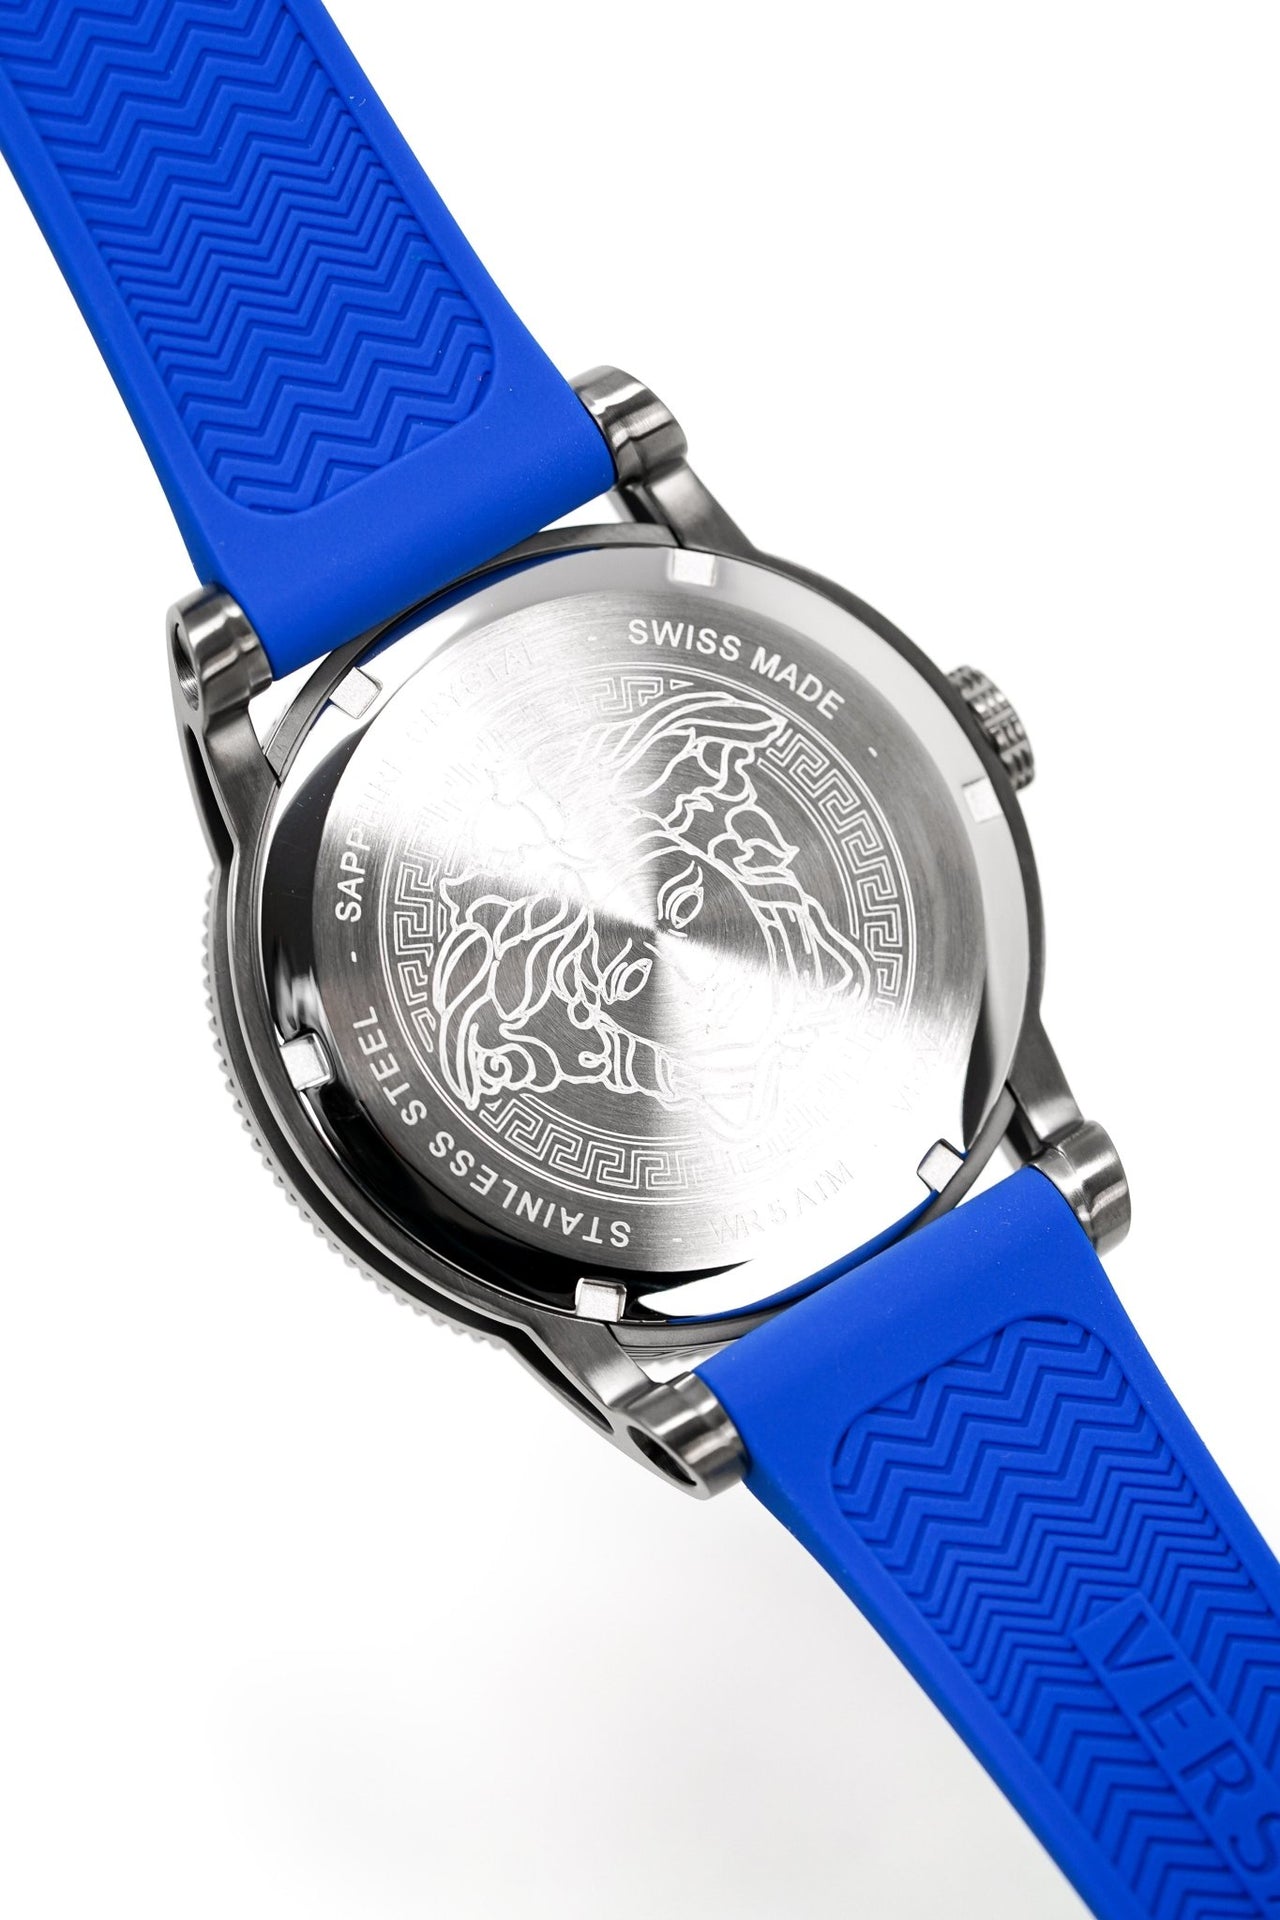 Versace Men's Watch V-Palazzo Blue VE2V00722 - Watches & Crystals